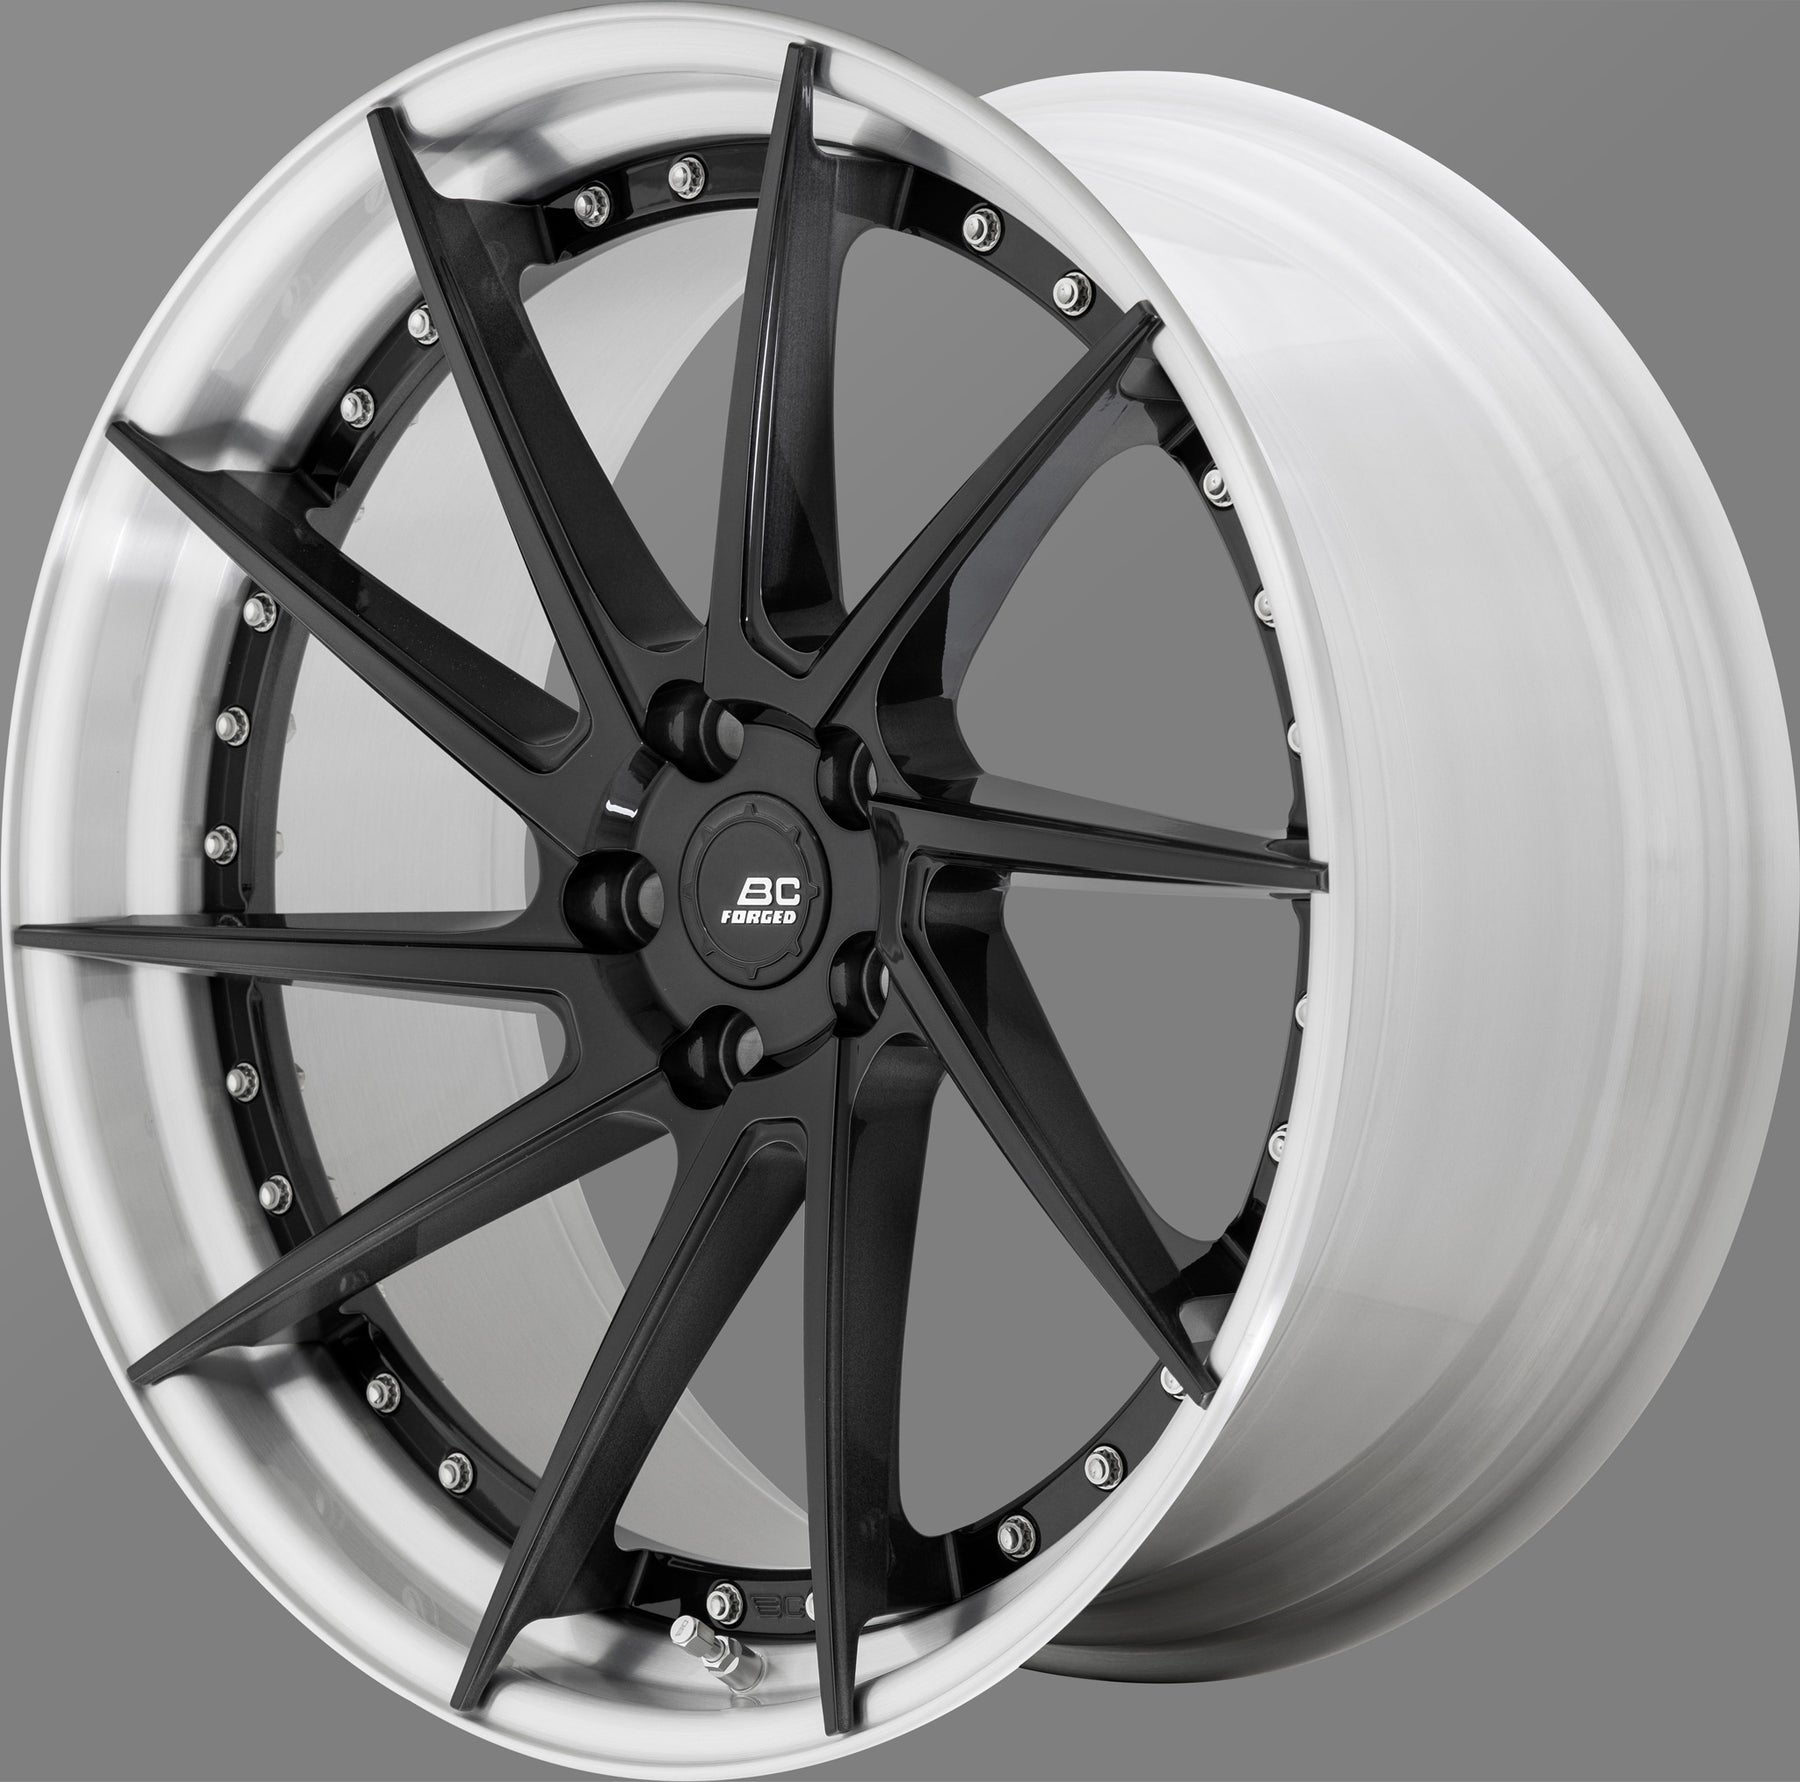 BC Forged HCA210S